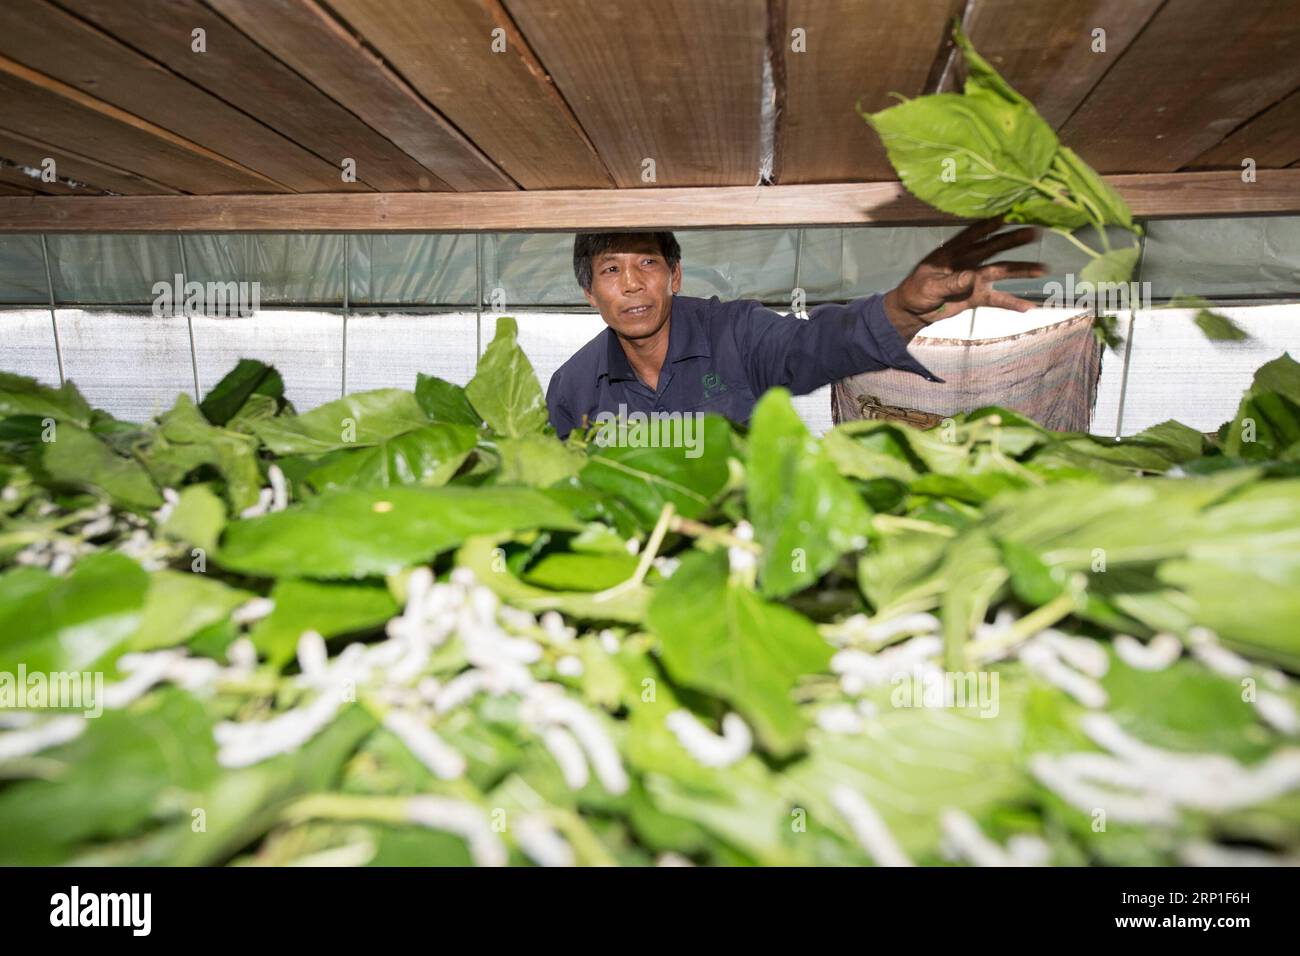 (180702) -- CHUN AN, July 2, 2018 -- Workers feed silkworms with mulberry leaves at a silkworm breeding base of Cathaya Group in Wangcun Village of Chun an County, east China s Zhejiang Province, May 9, 2018. Chun an County cooperated with Cathaya Group in building silkworm breeding bases to produce high quality cocoon and silk products. To date, about 4,000 hectares mulberry bushes have been cultivated and some 300 tonnes raw silk are produced per year. )(wsw) CHINA-ZHEJIANG-SILK INDUSTRY (CN) WengxXinyang PUBLICATIONxNOTxINxCHN Stock Photo